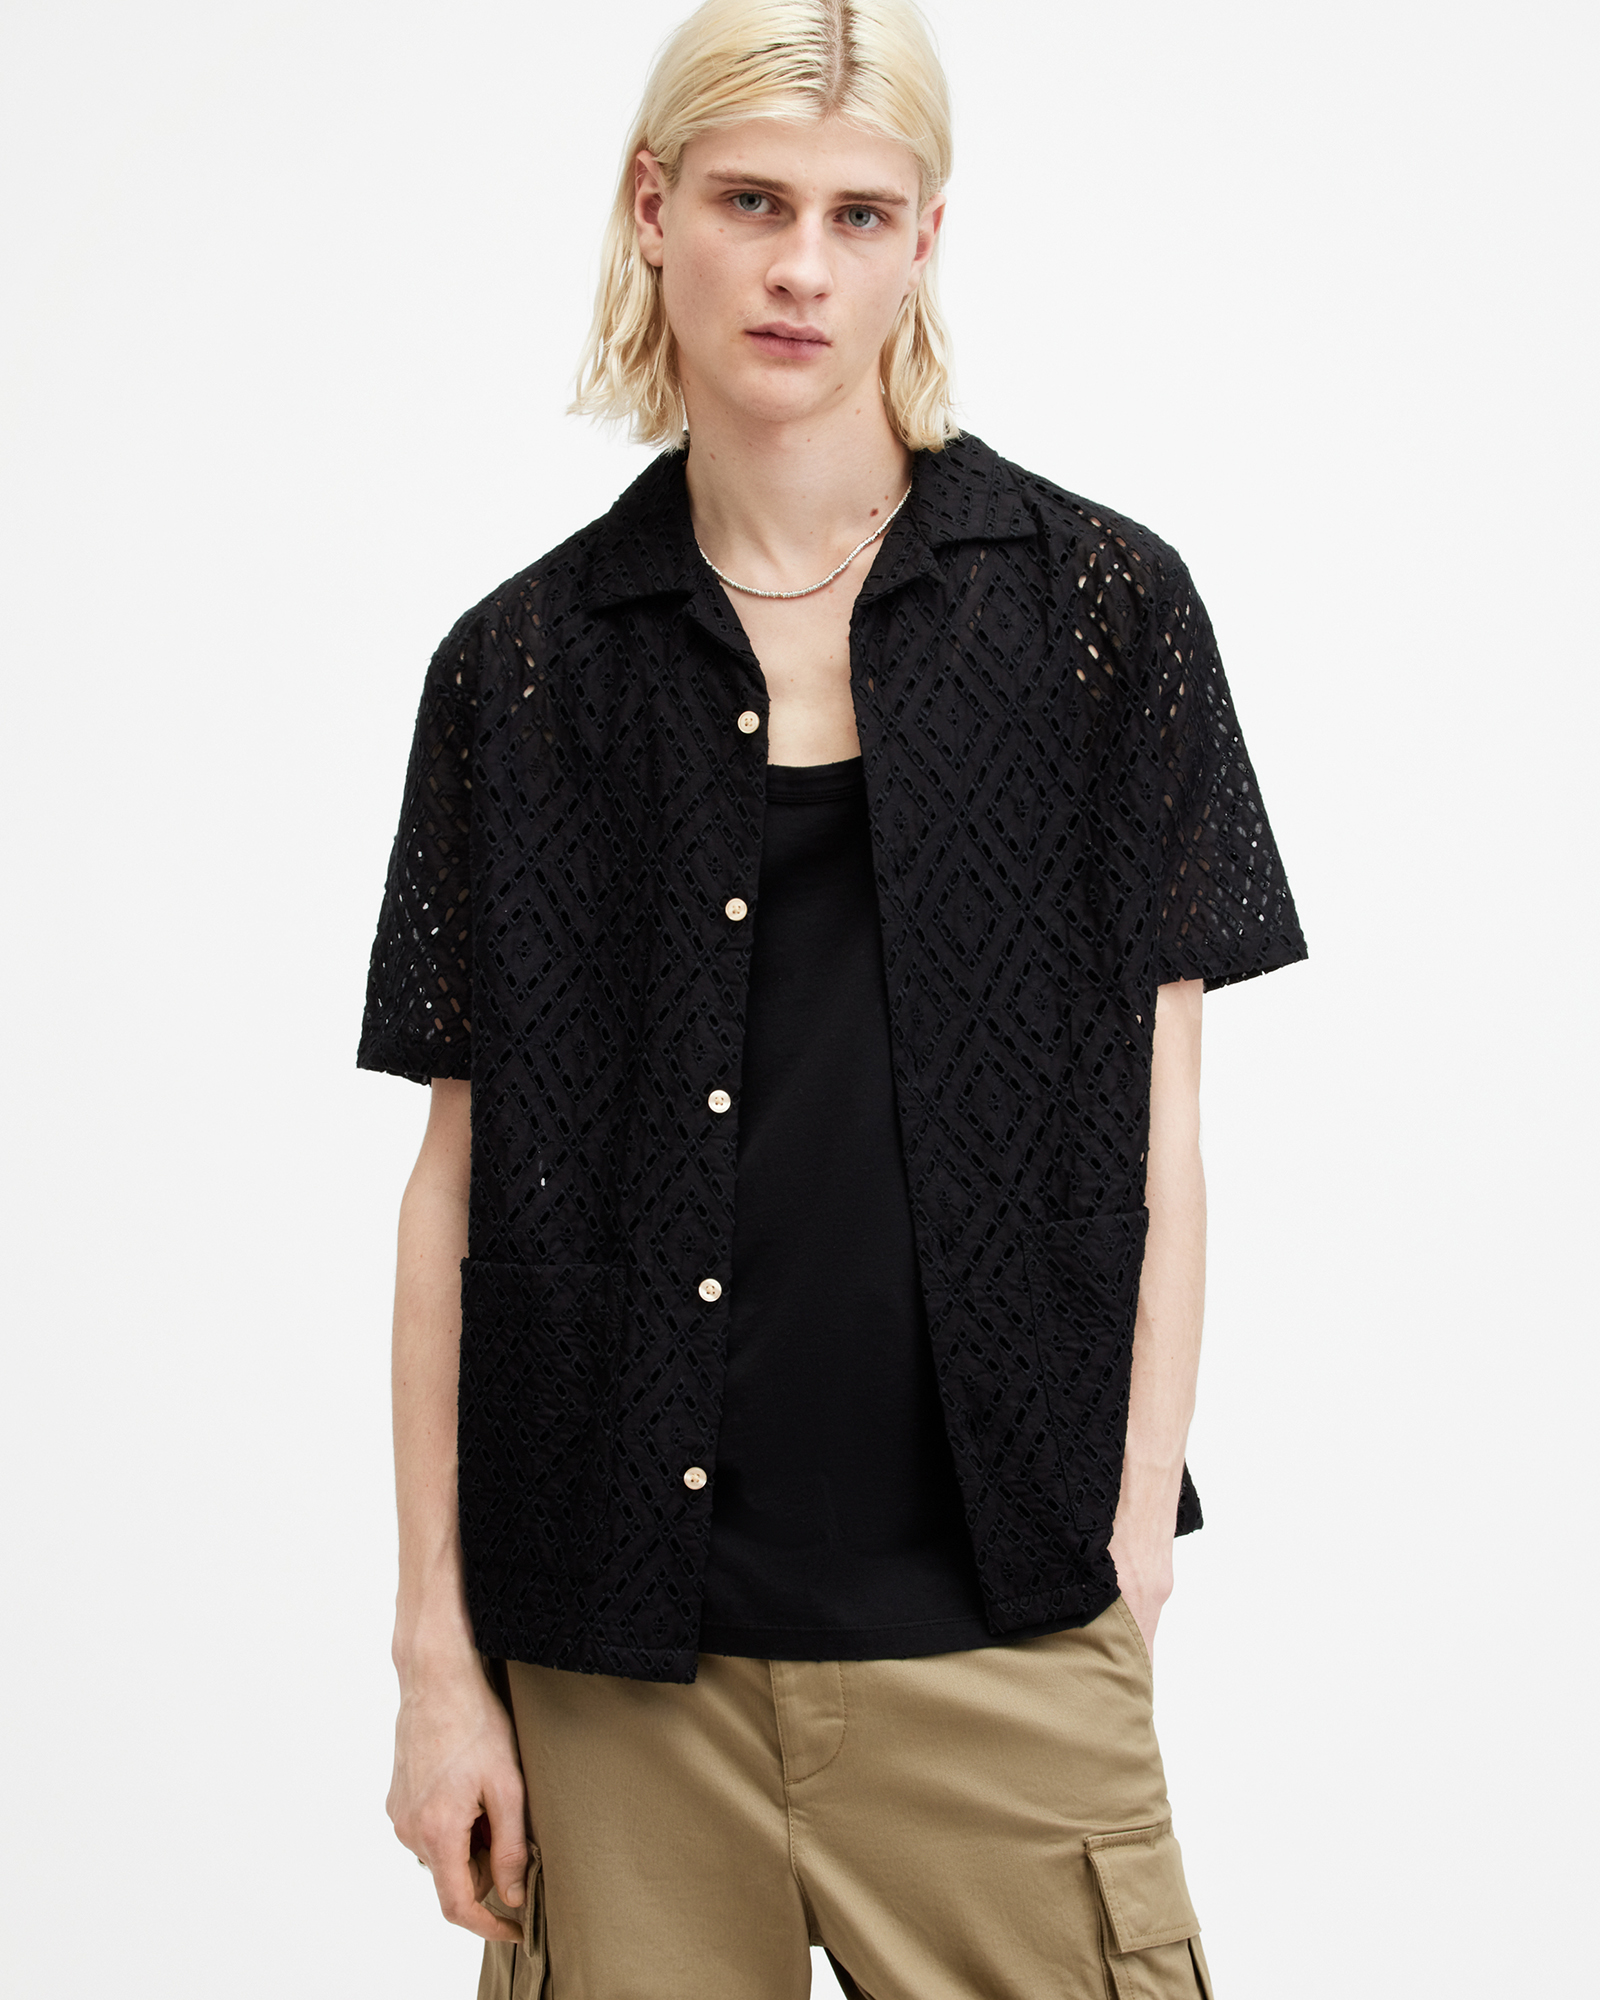 AllSaints Quinta Broderie Relaxed Fit Shirt,, Jet Black